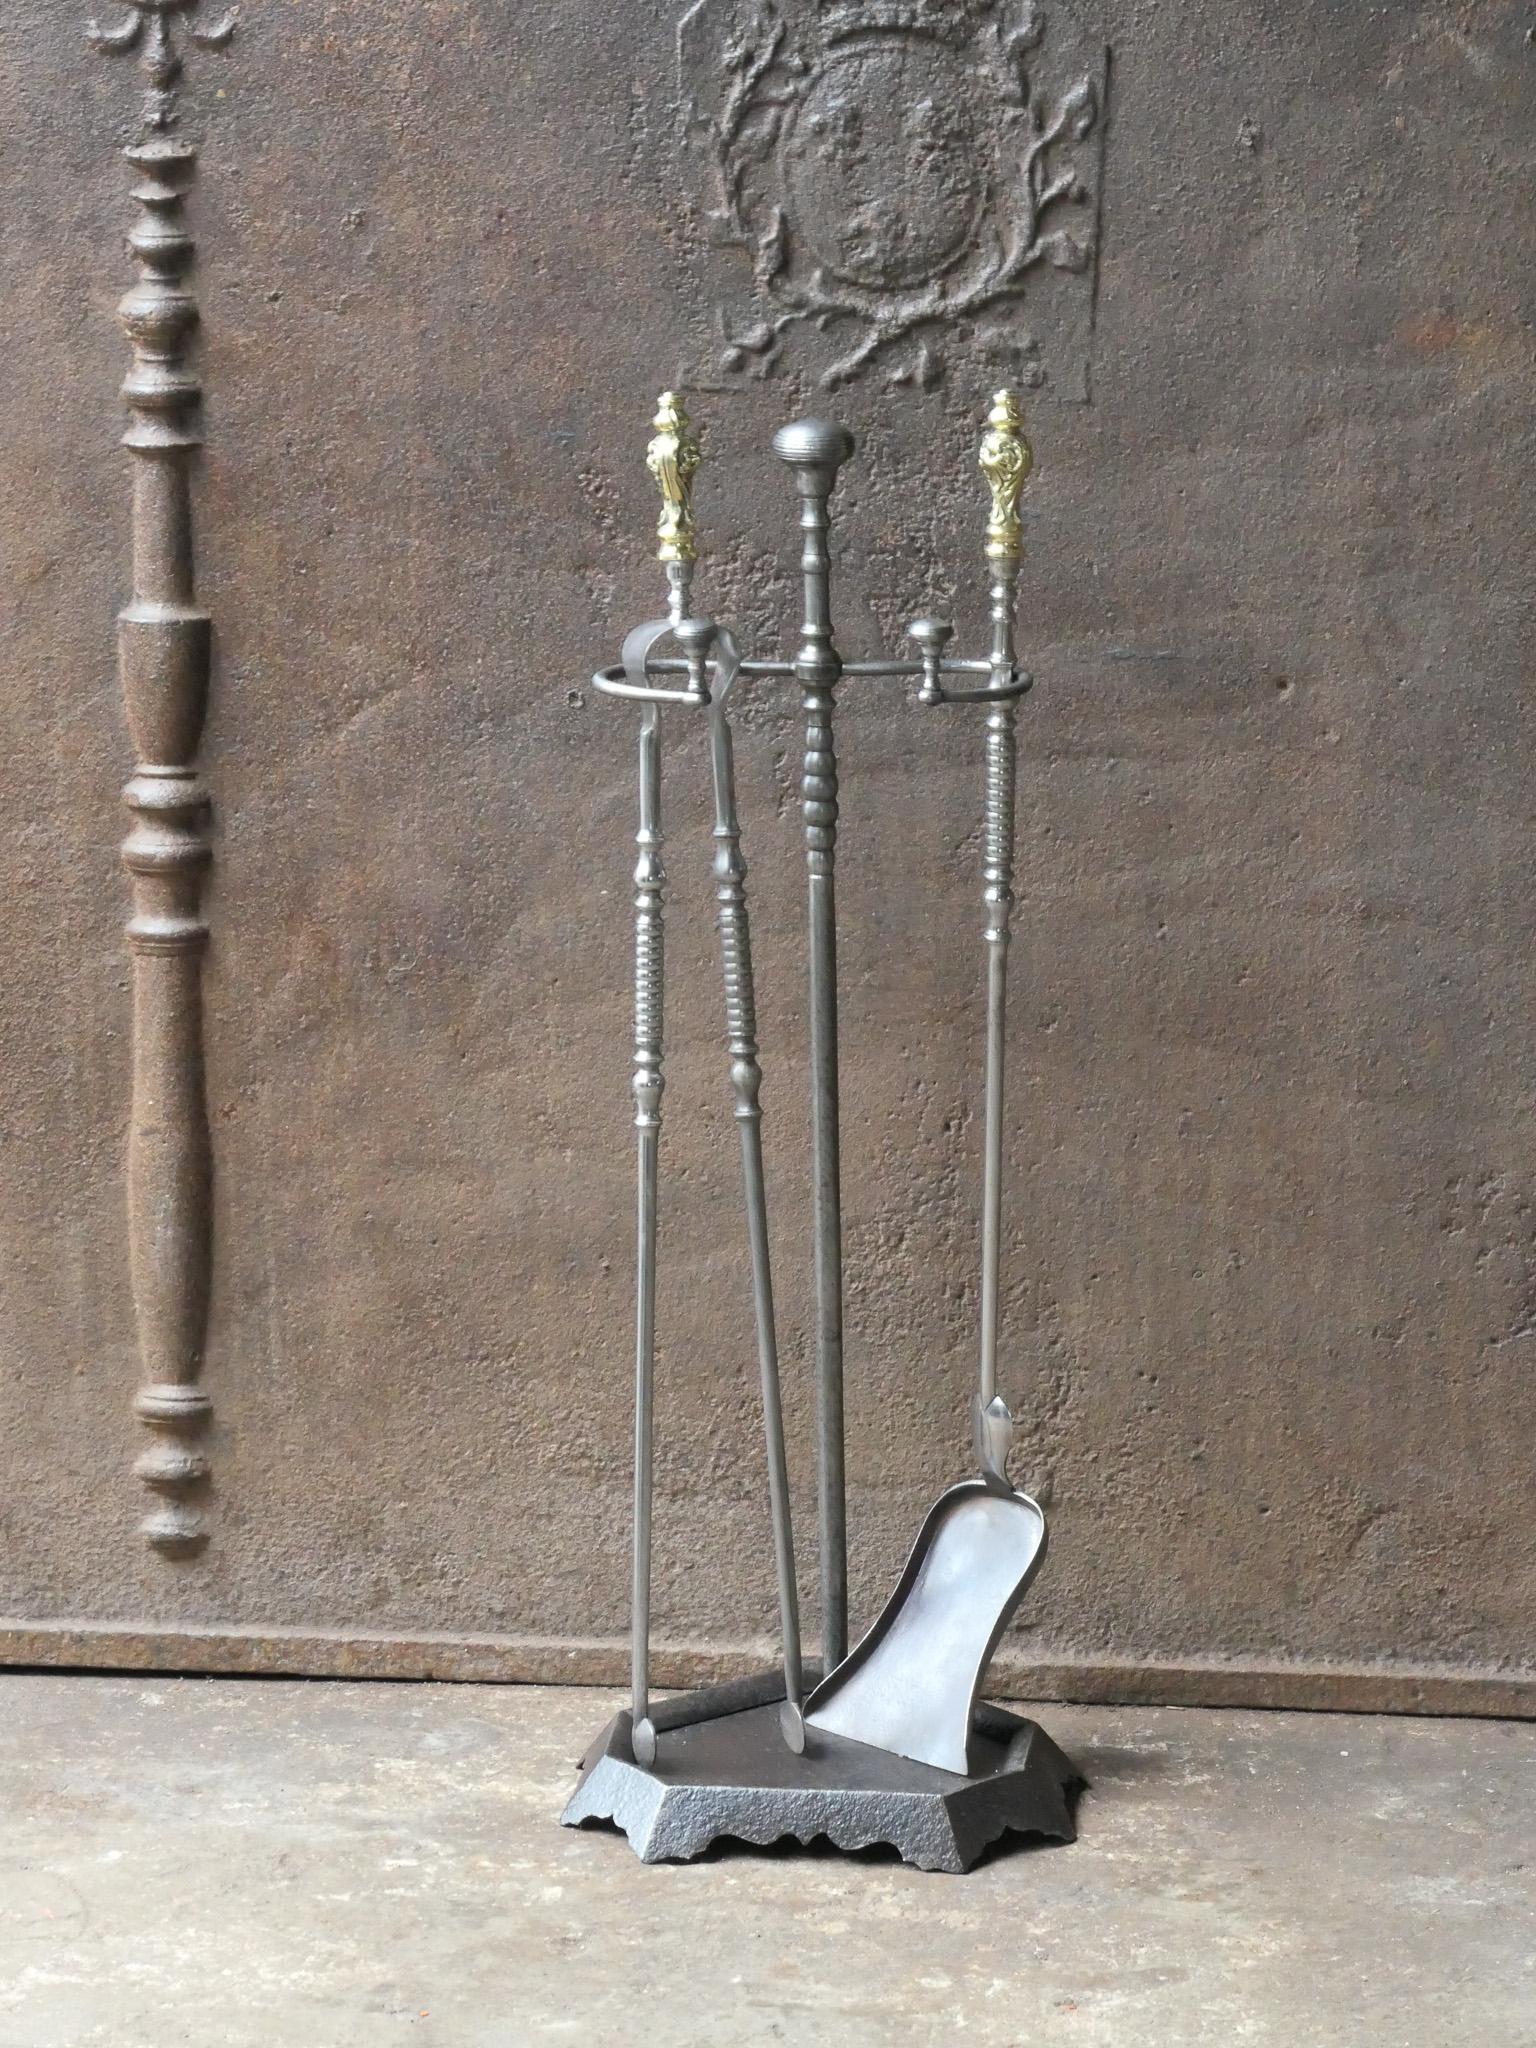 19th-century French Napoleon III period fireplace set. The tool set consists of thongs, a shovel and a stand. The tools are made of wrought iron with polished brass handles and the stand is made of cast iron. The set is signed by 'Grandy Fils'. The